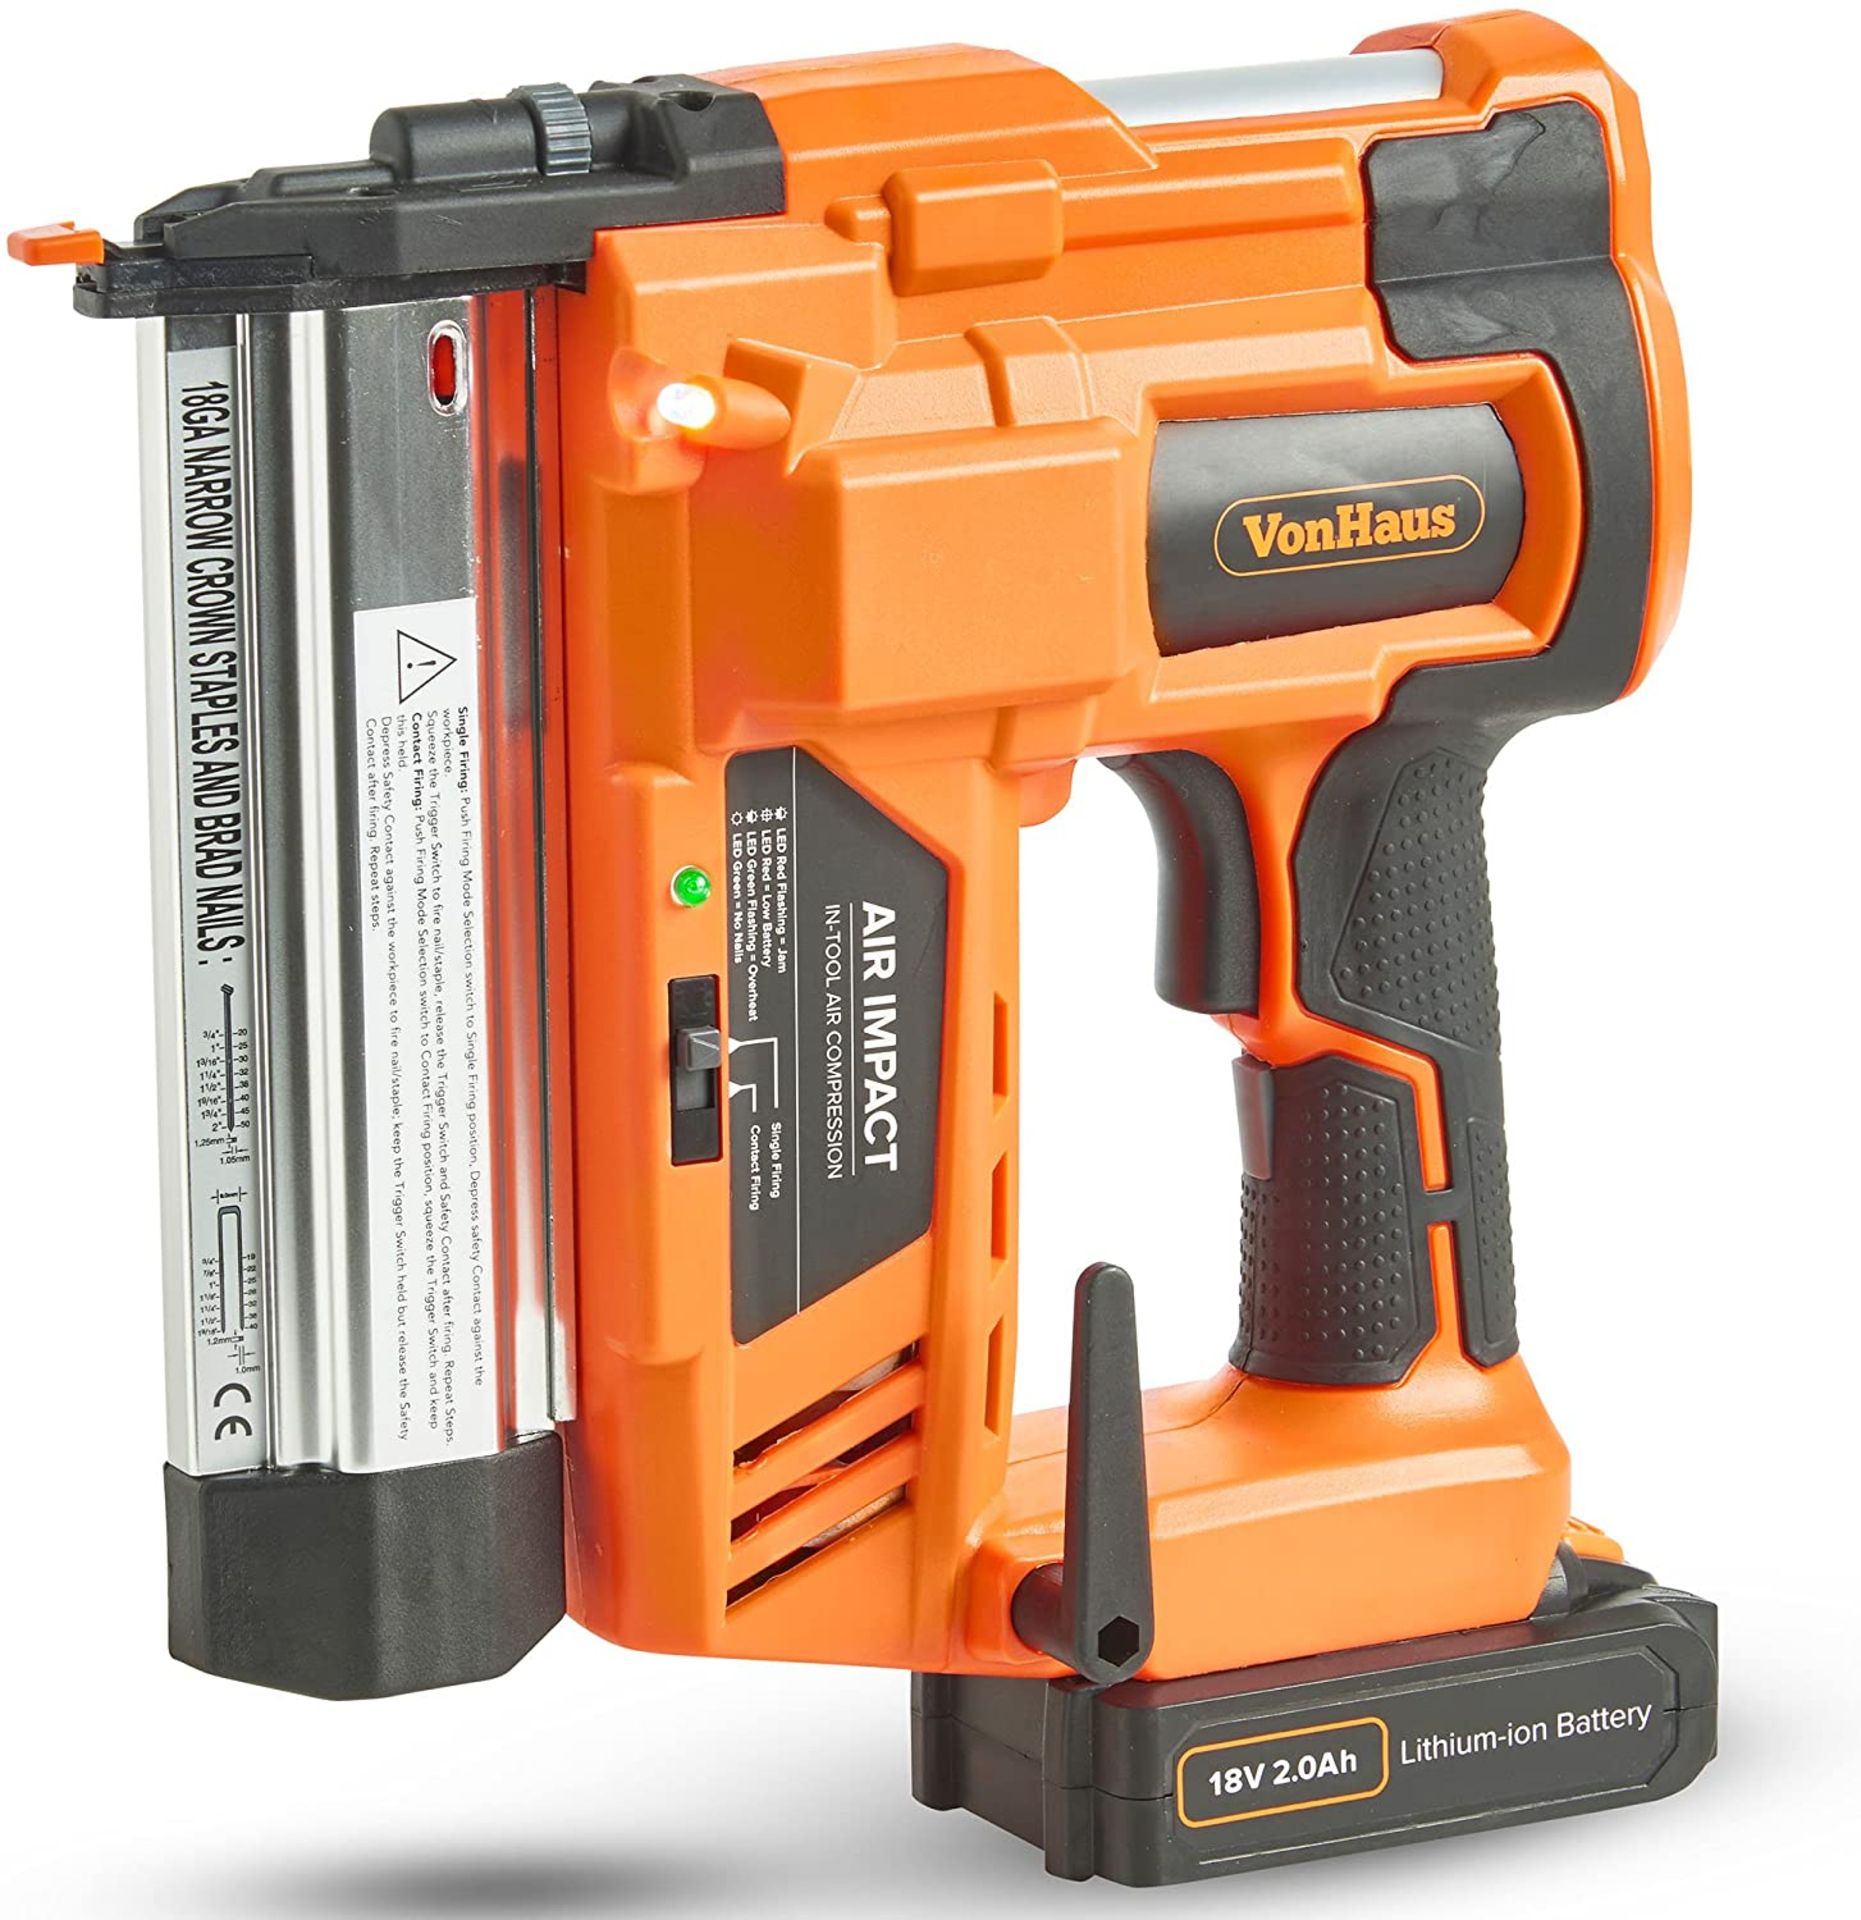 (WK32) Cordless Nail Gun with 18v Battery, Charger and 200 Nails/Staples - 2 in 1 Stapler Naile... - Image 2 of 3